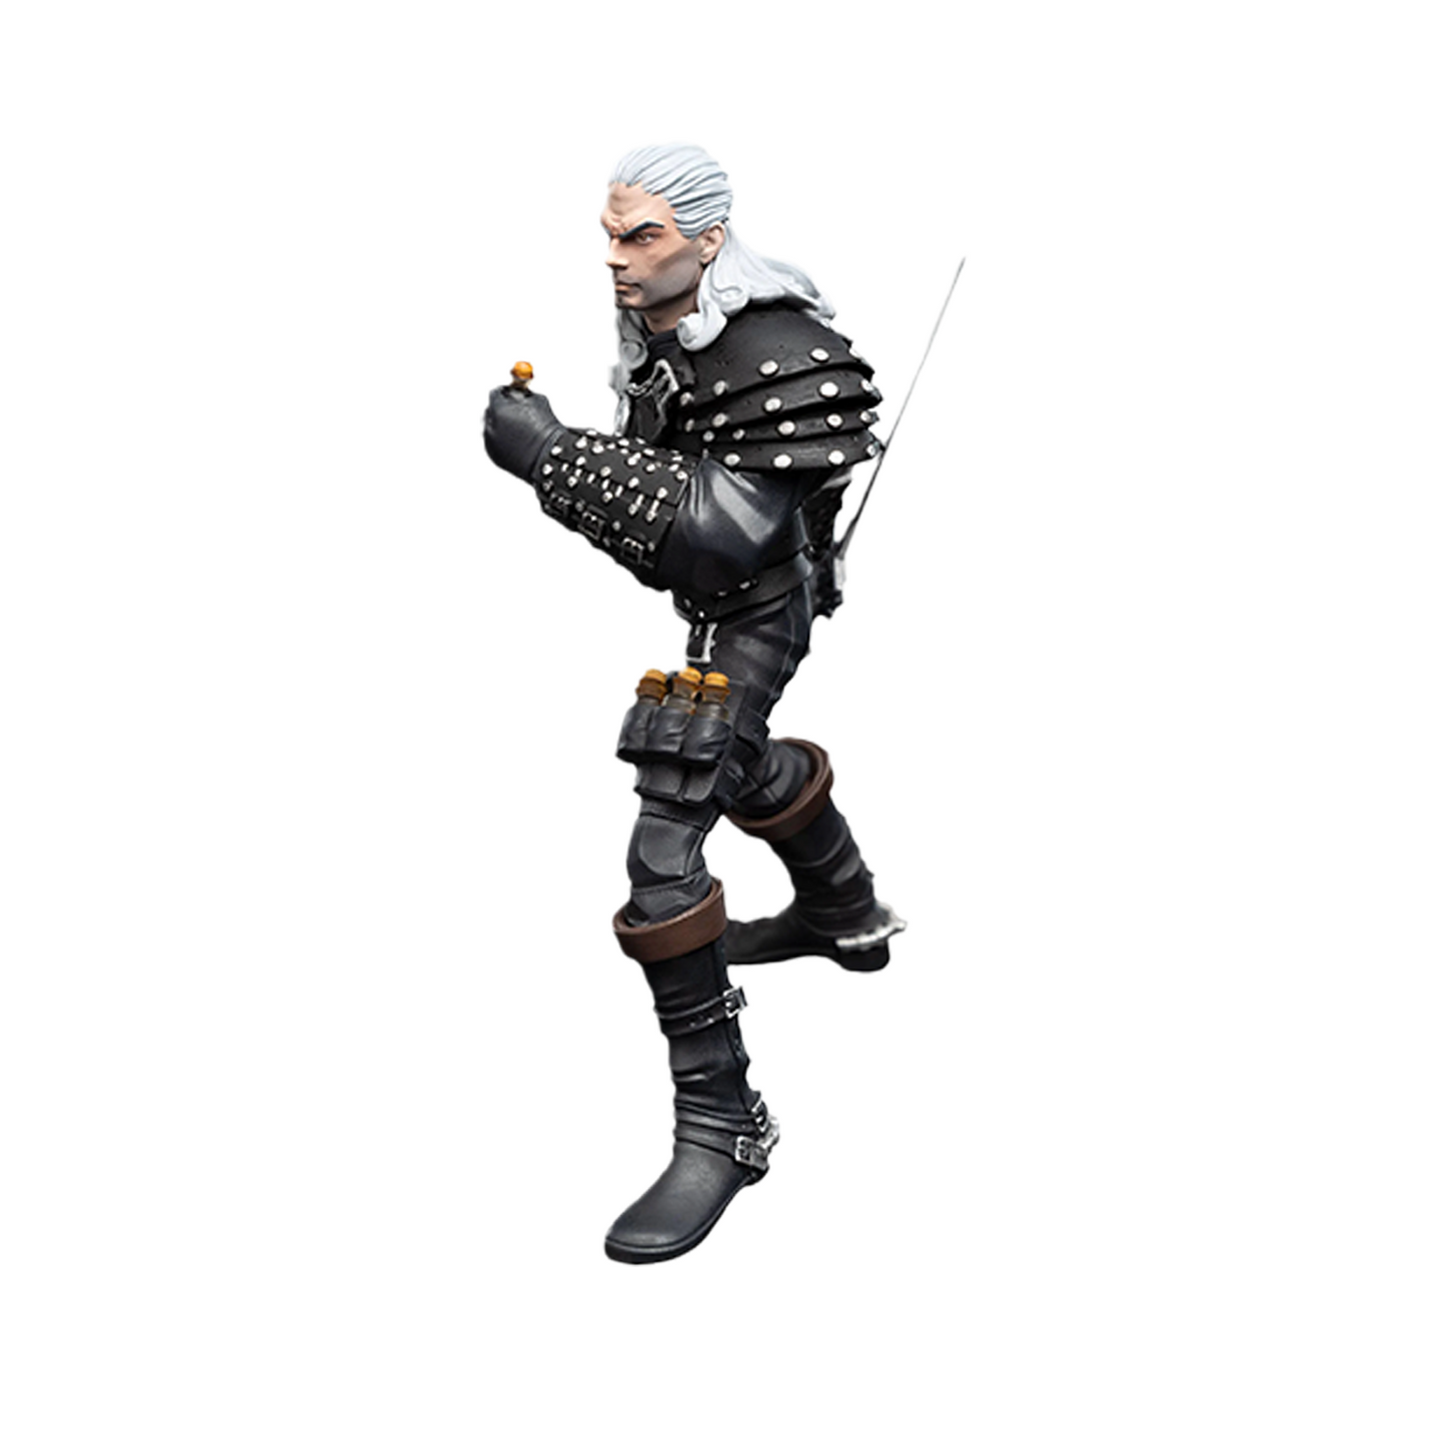 Weta Mini Epic figure of Geralt of Rivia character side view